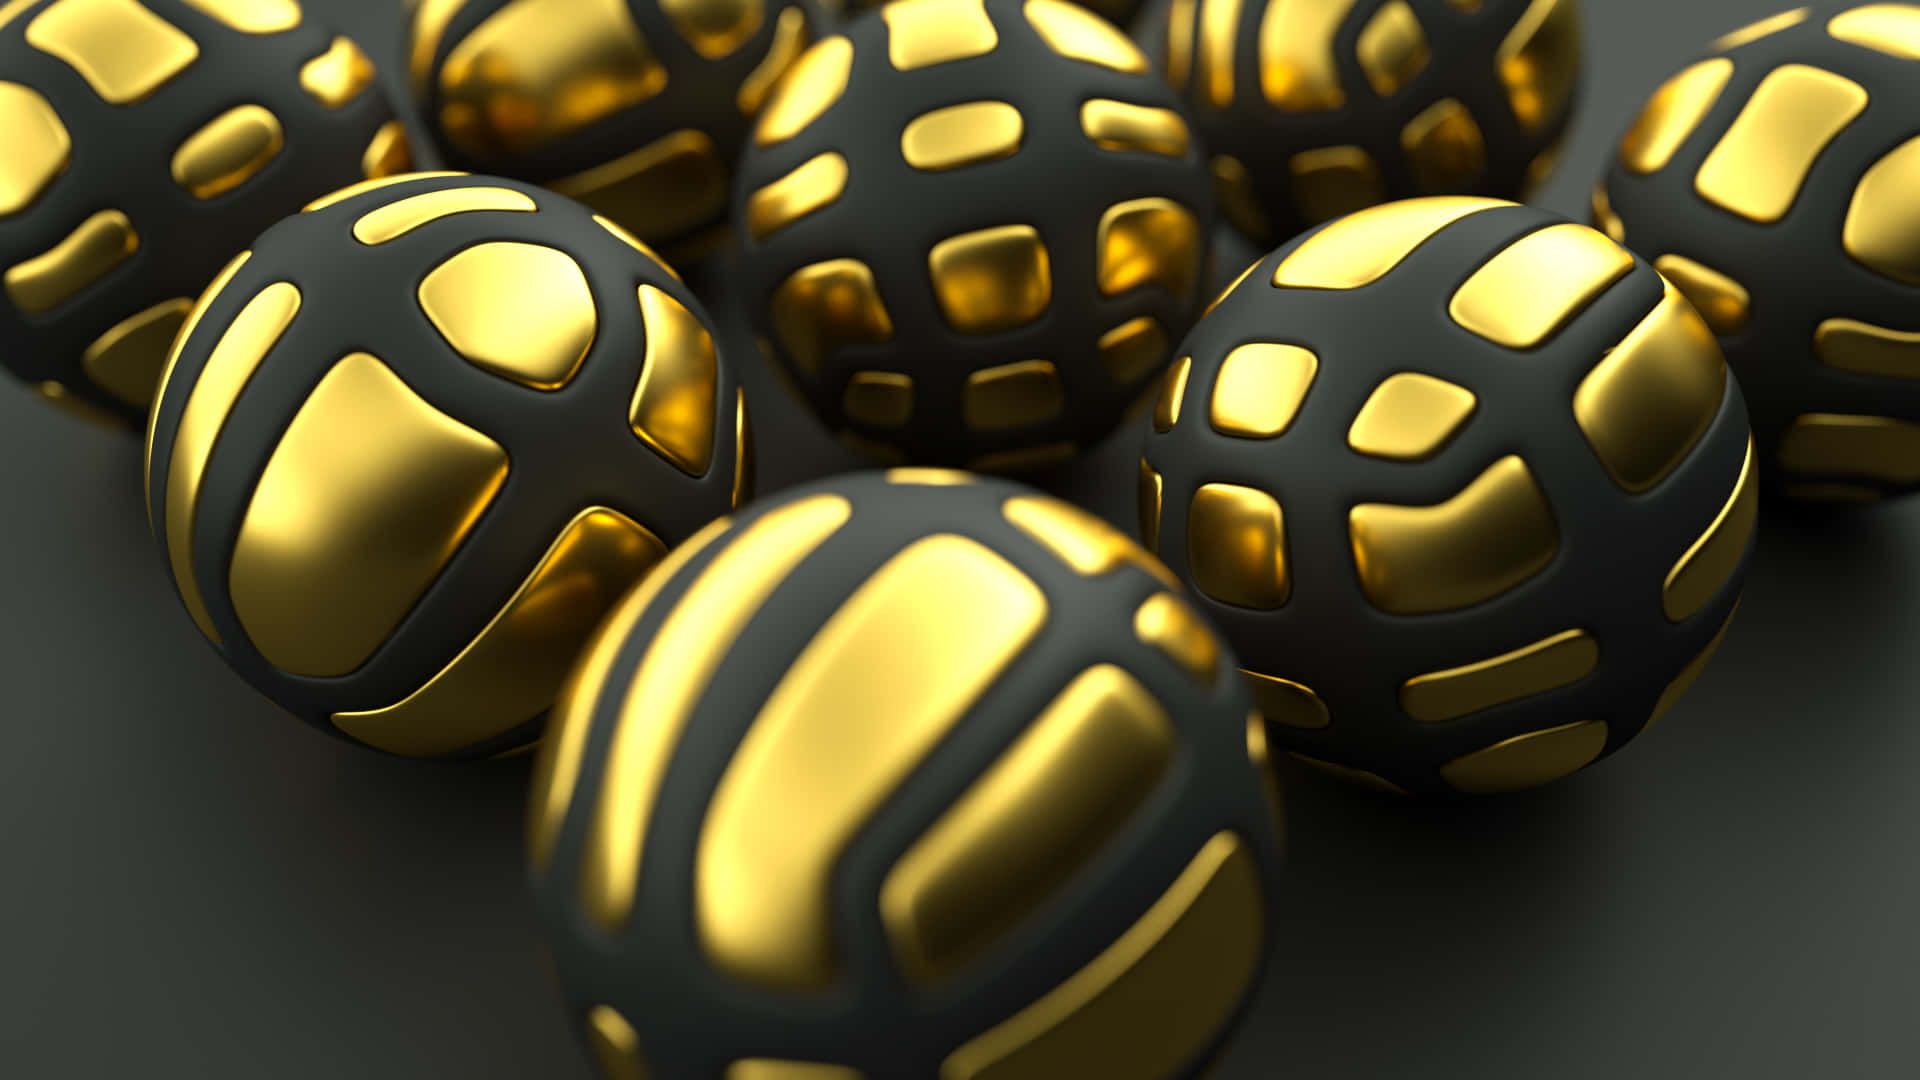 A Group Of Gold And Black Eggs On A Black Surface Wallpaper